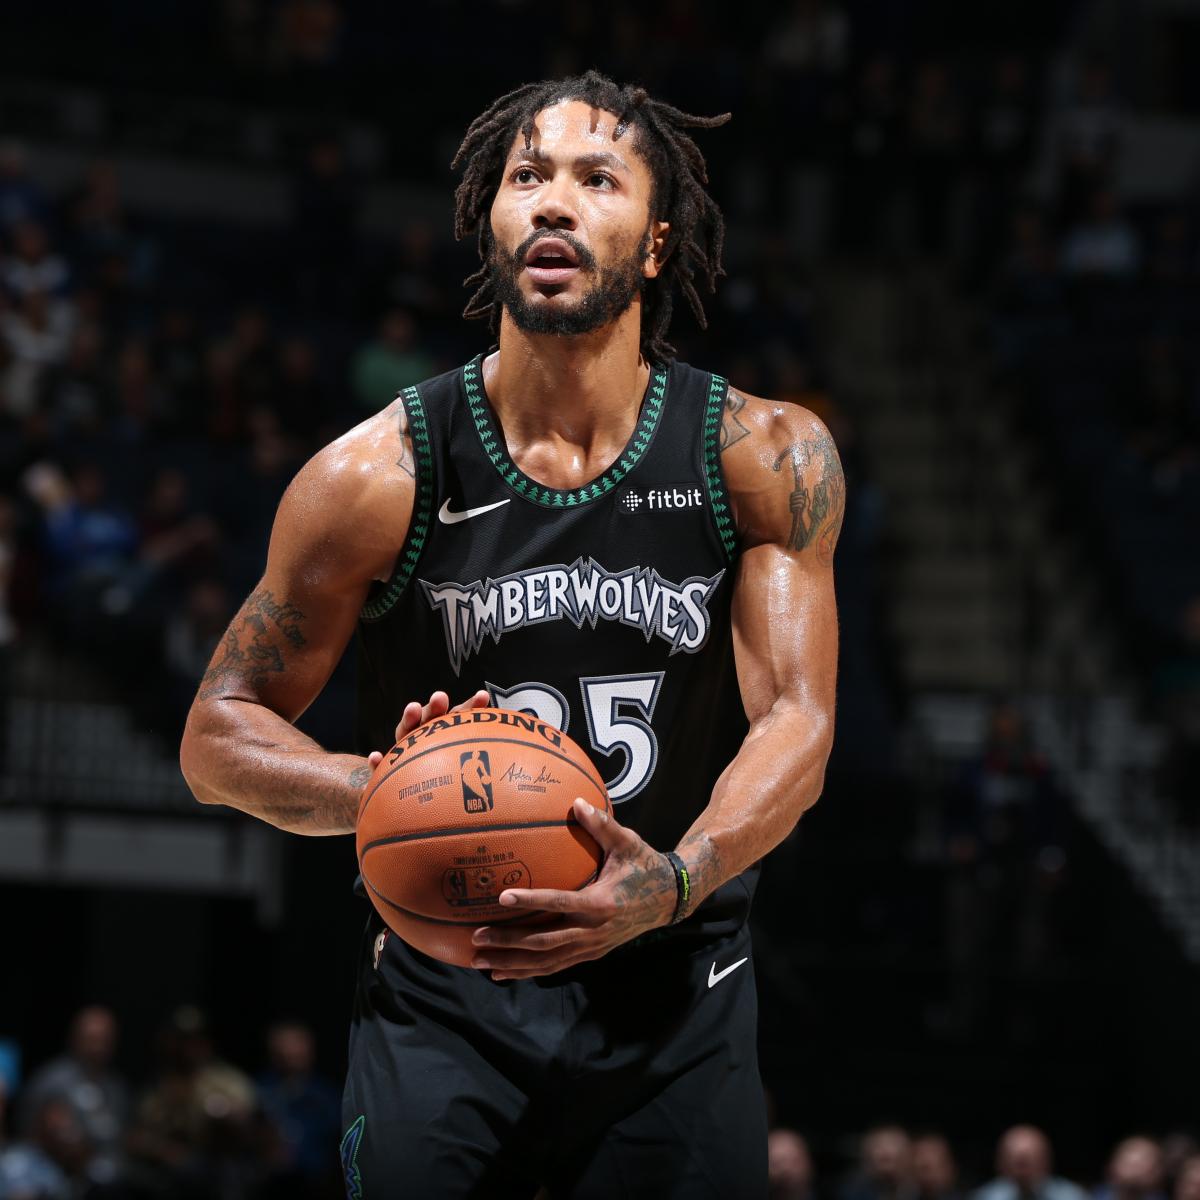 Minnesota Timberwolves: The reinvented Derrick Rose is a 2019 All